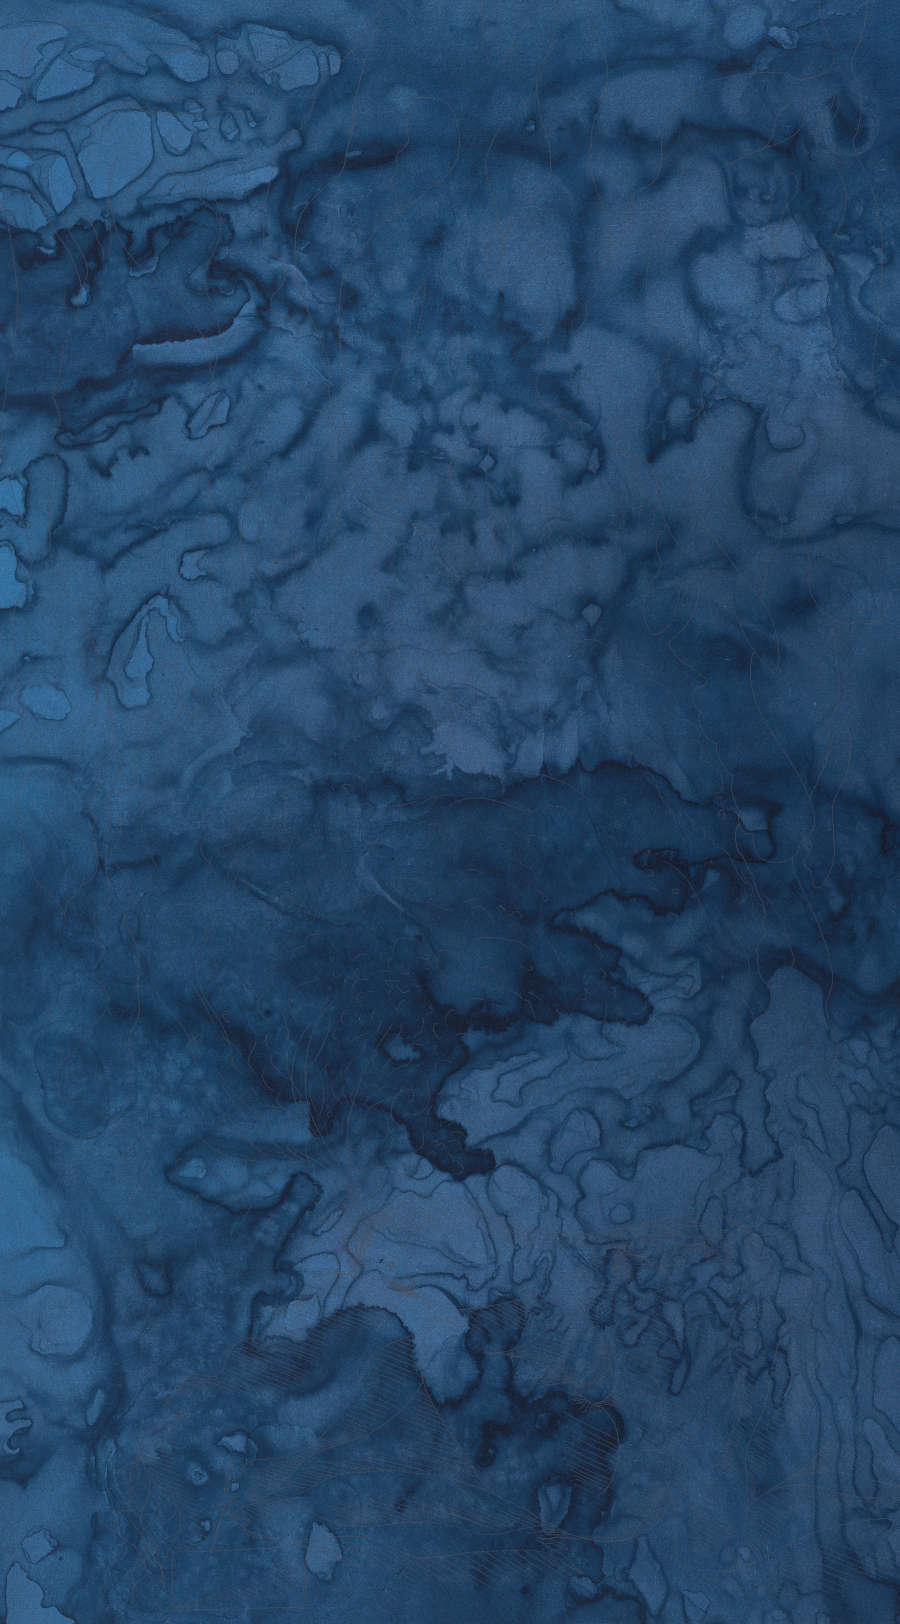 Dark, dense, blue marbling filles the entirety of a blue dyed sheet of paper. 